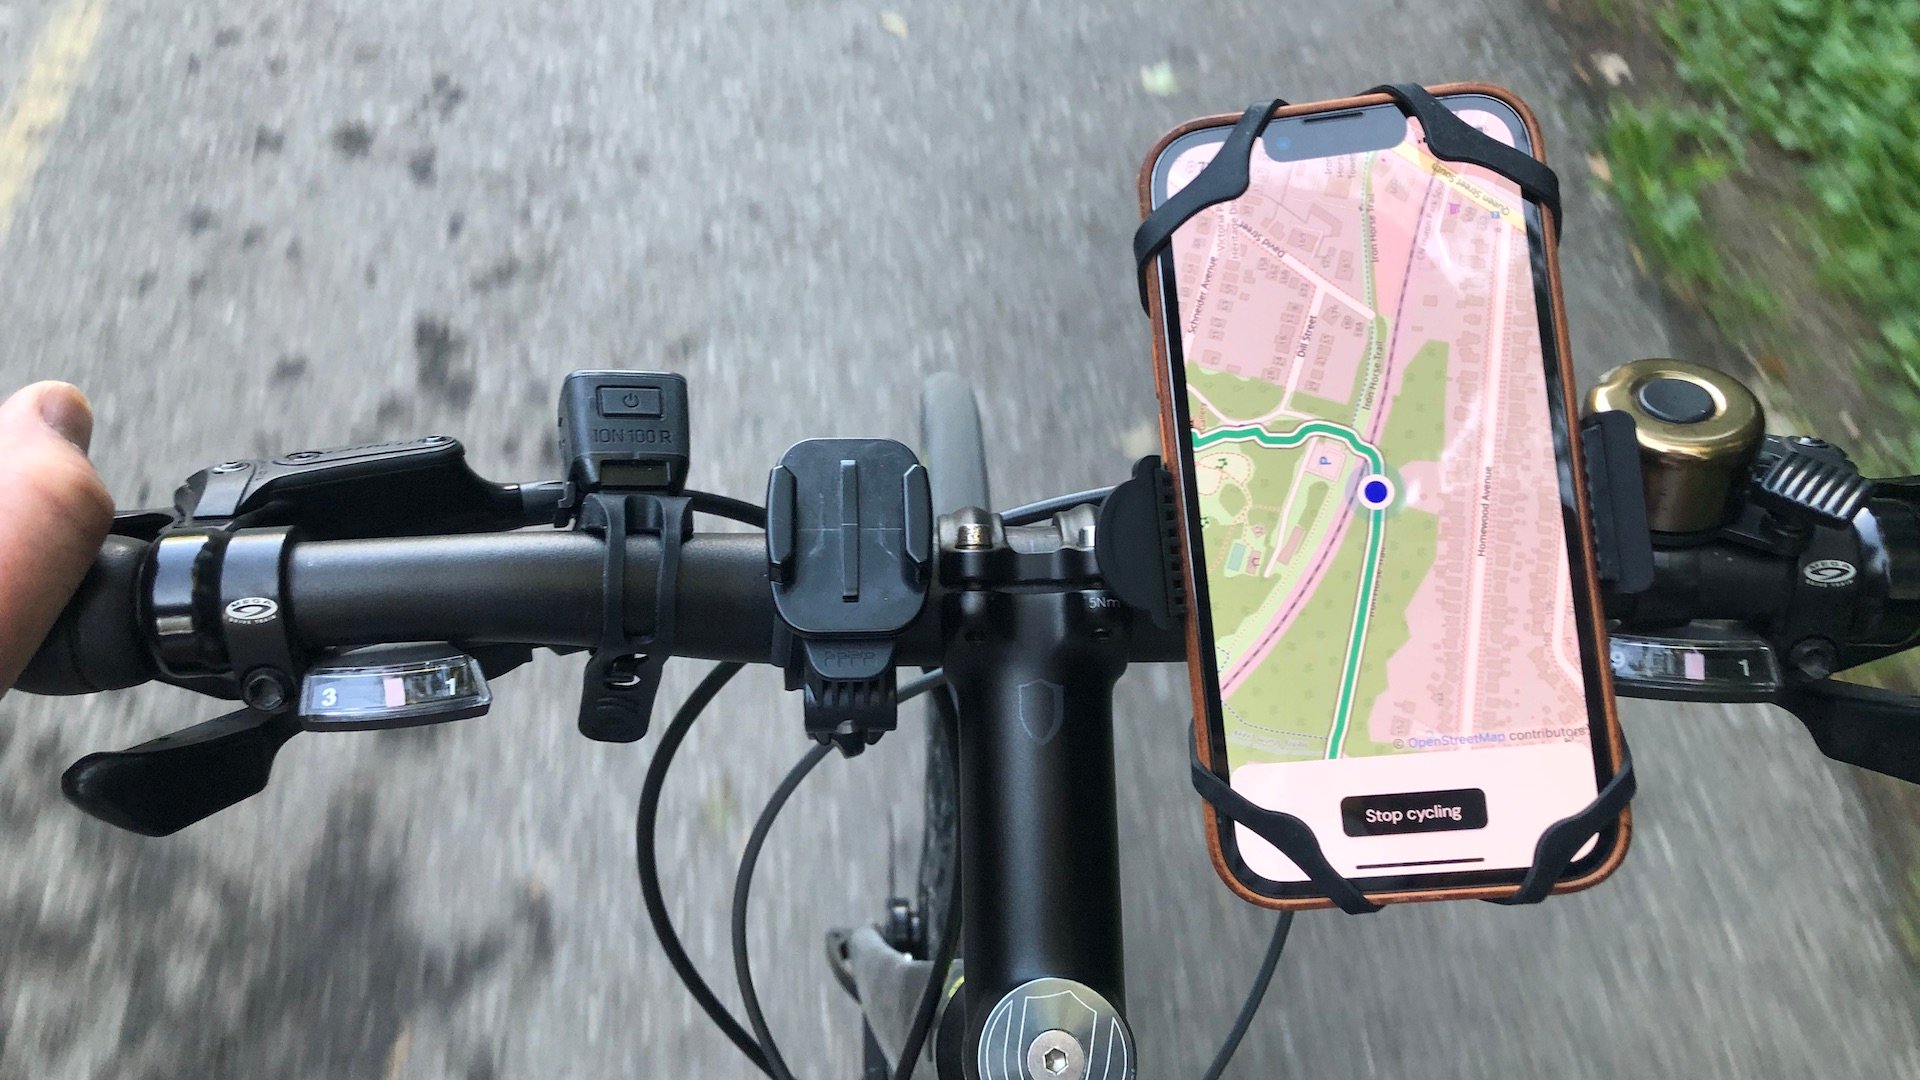 A bicyclist's view looking down at a phone mounted on bike handlebars. The phone's screen shows a map with a marked route on it.